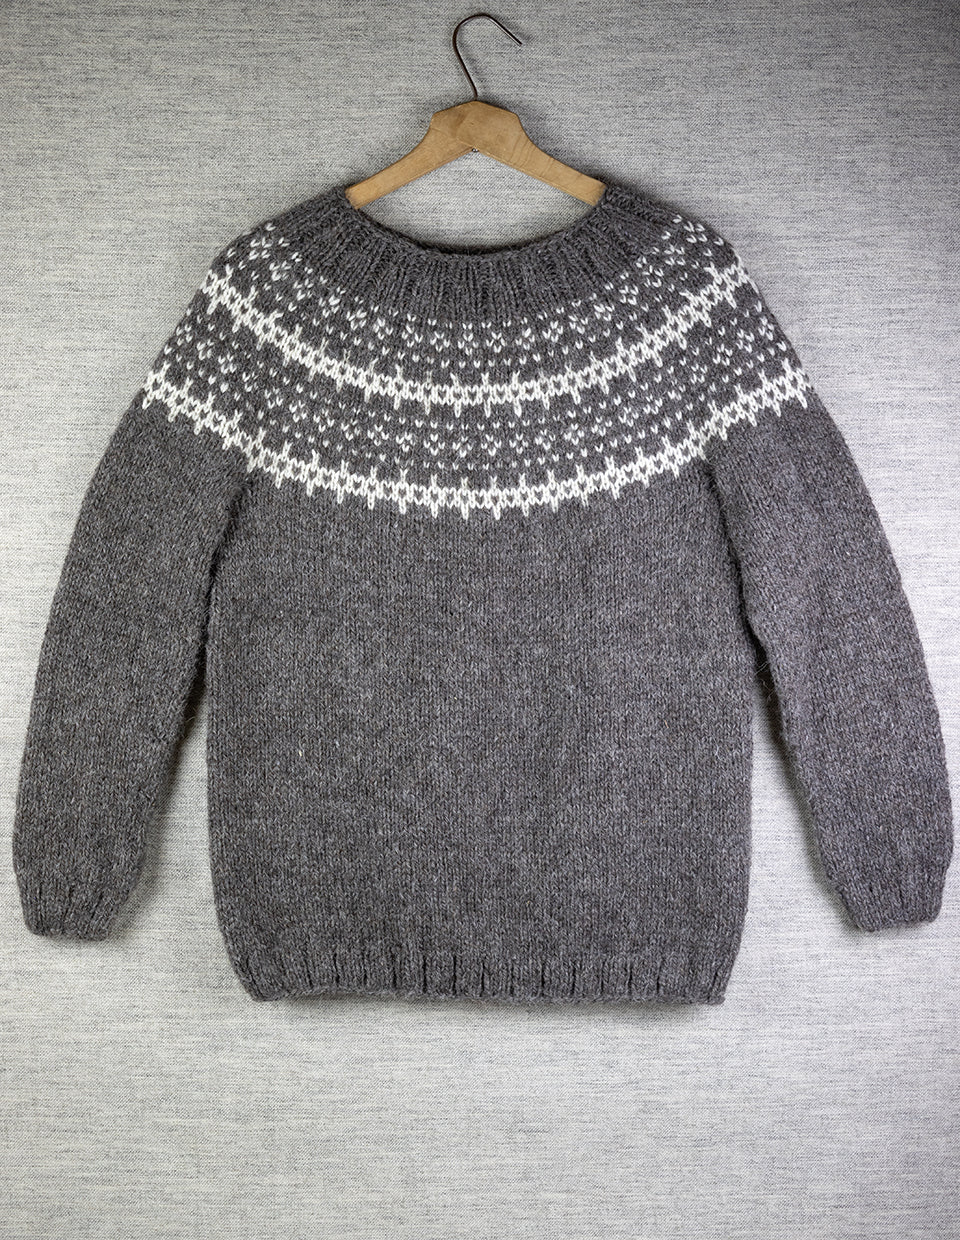 Salty Grain in Full storm, hand knitted sweater